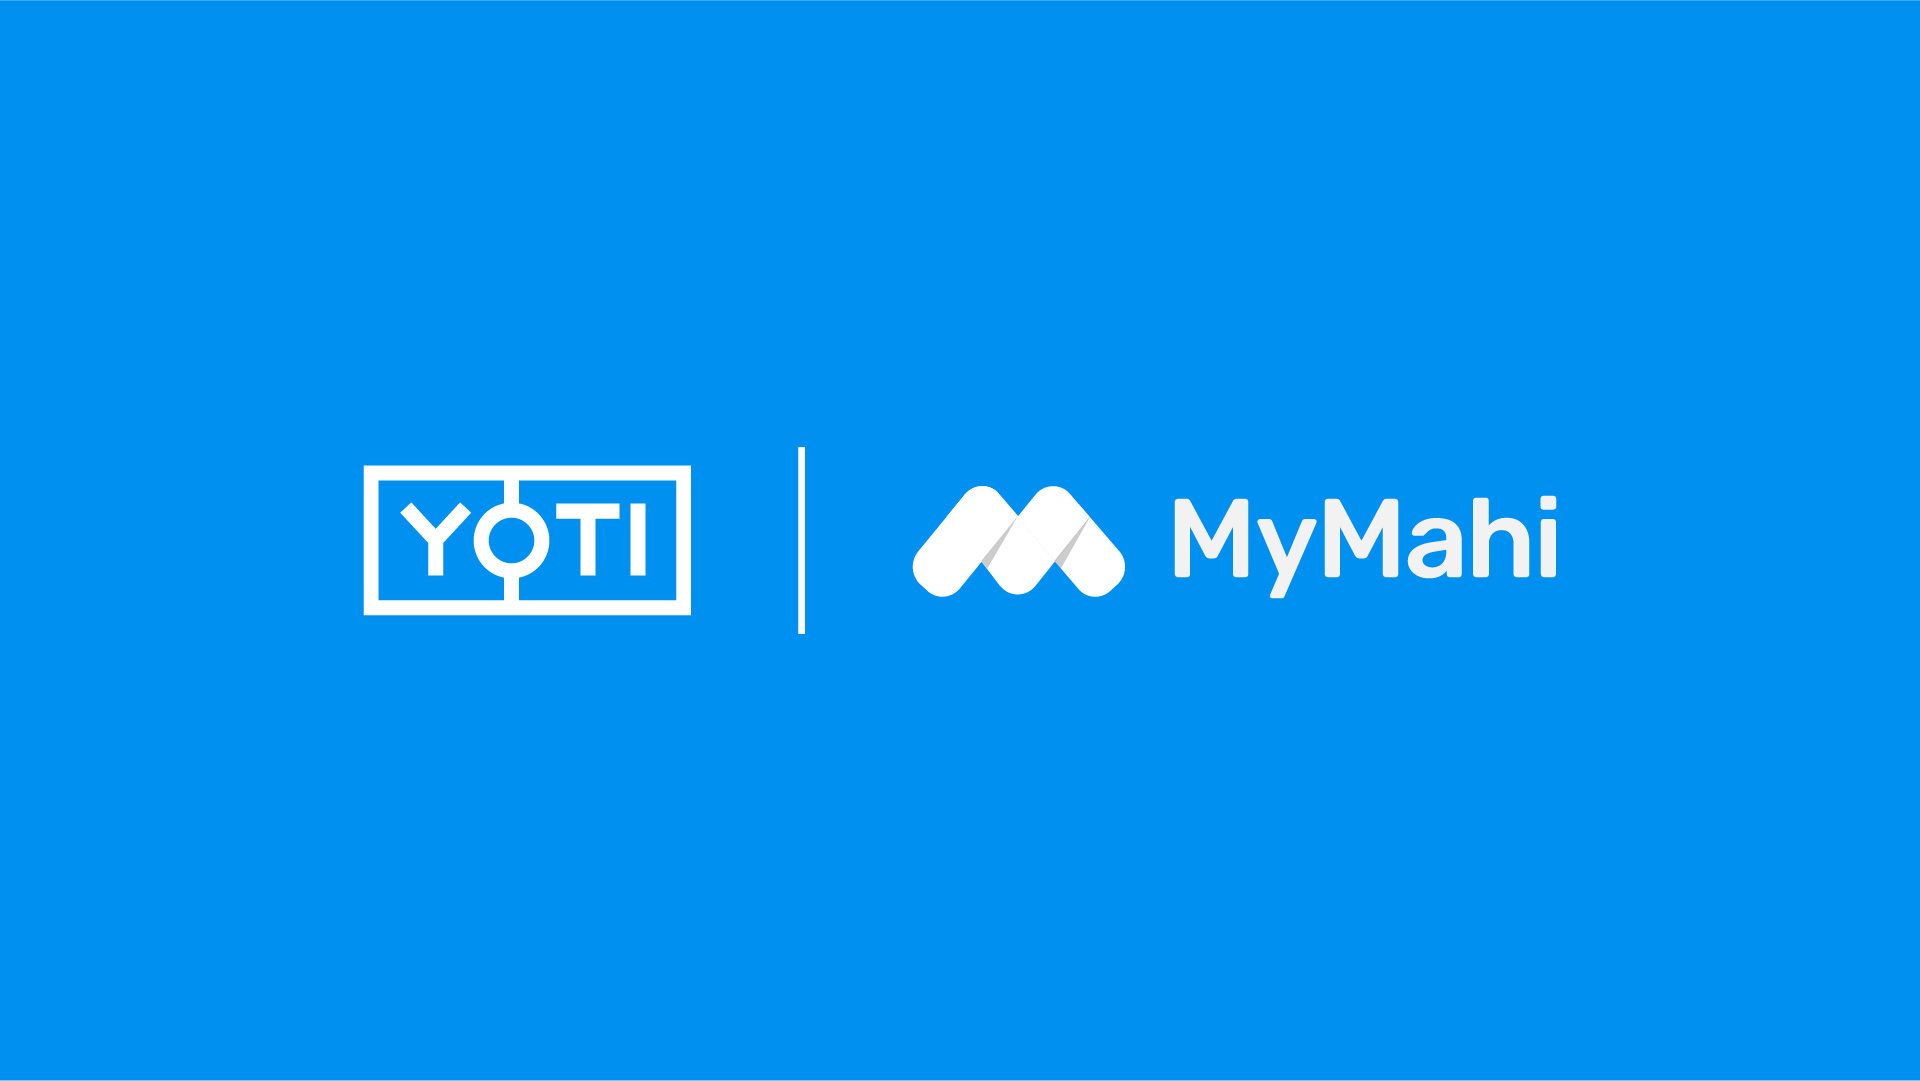 Educating young people about their digital identity with MyMahi